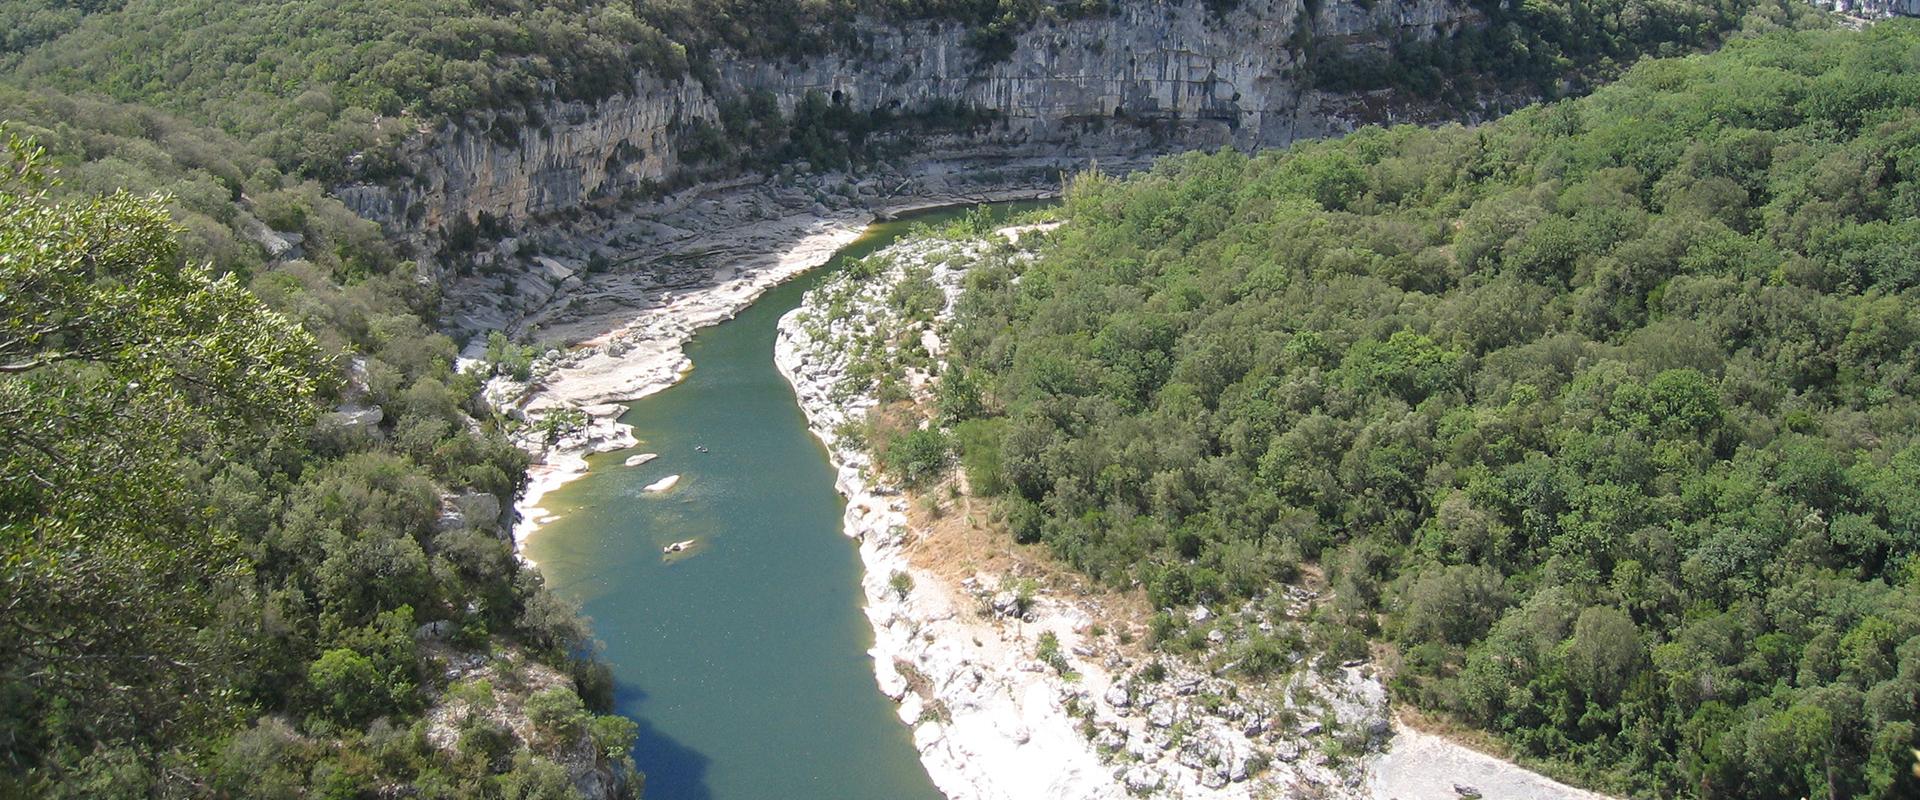 A gorge carved by the Ardèche river